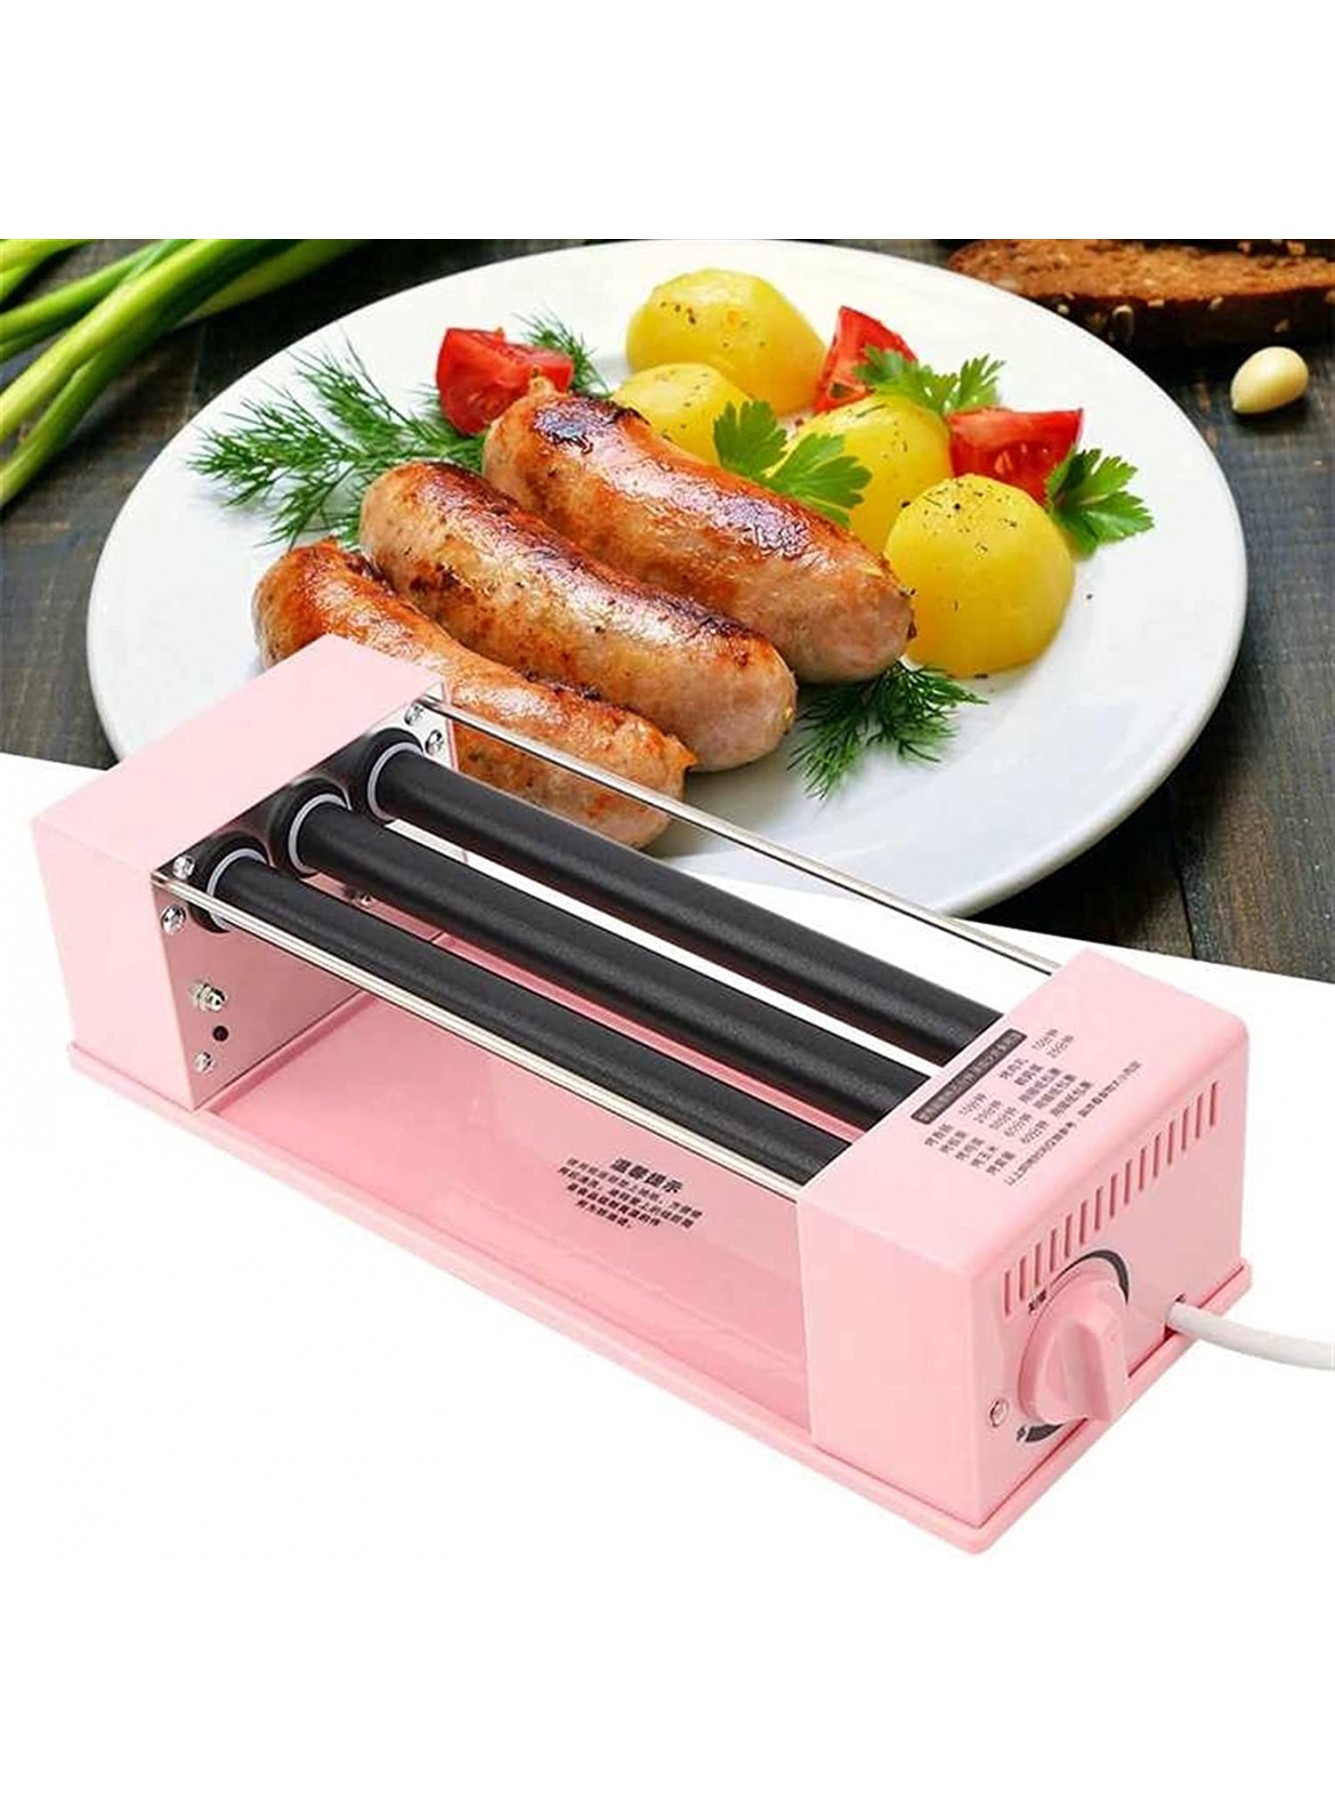 Hot Dog Toaster Oven Hot Dog Grill Roller Home Electric Sausage Maker Warmer Roast Machine for Home Color : 3 Tube B09B3FZKFT